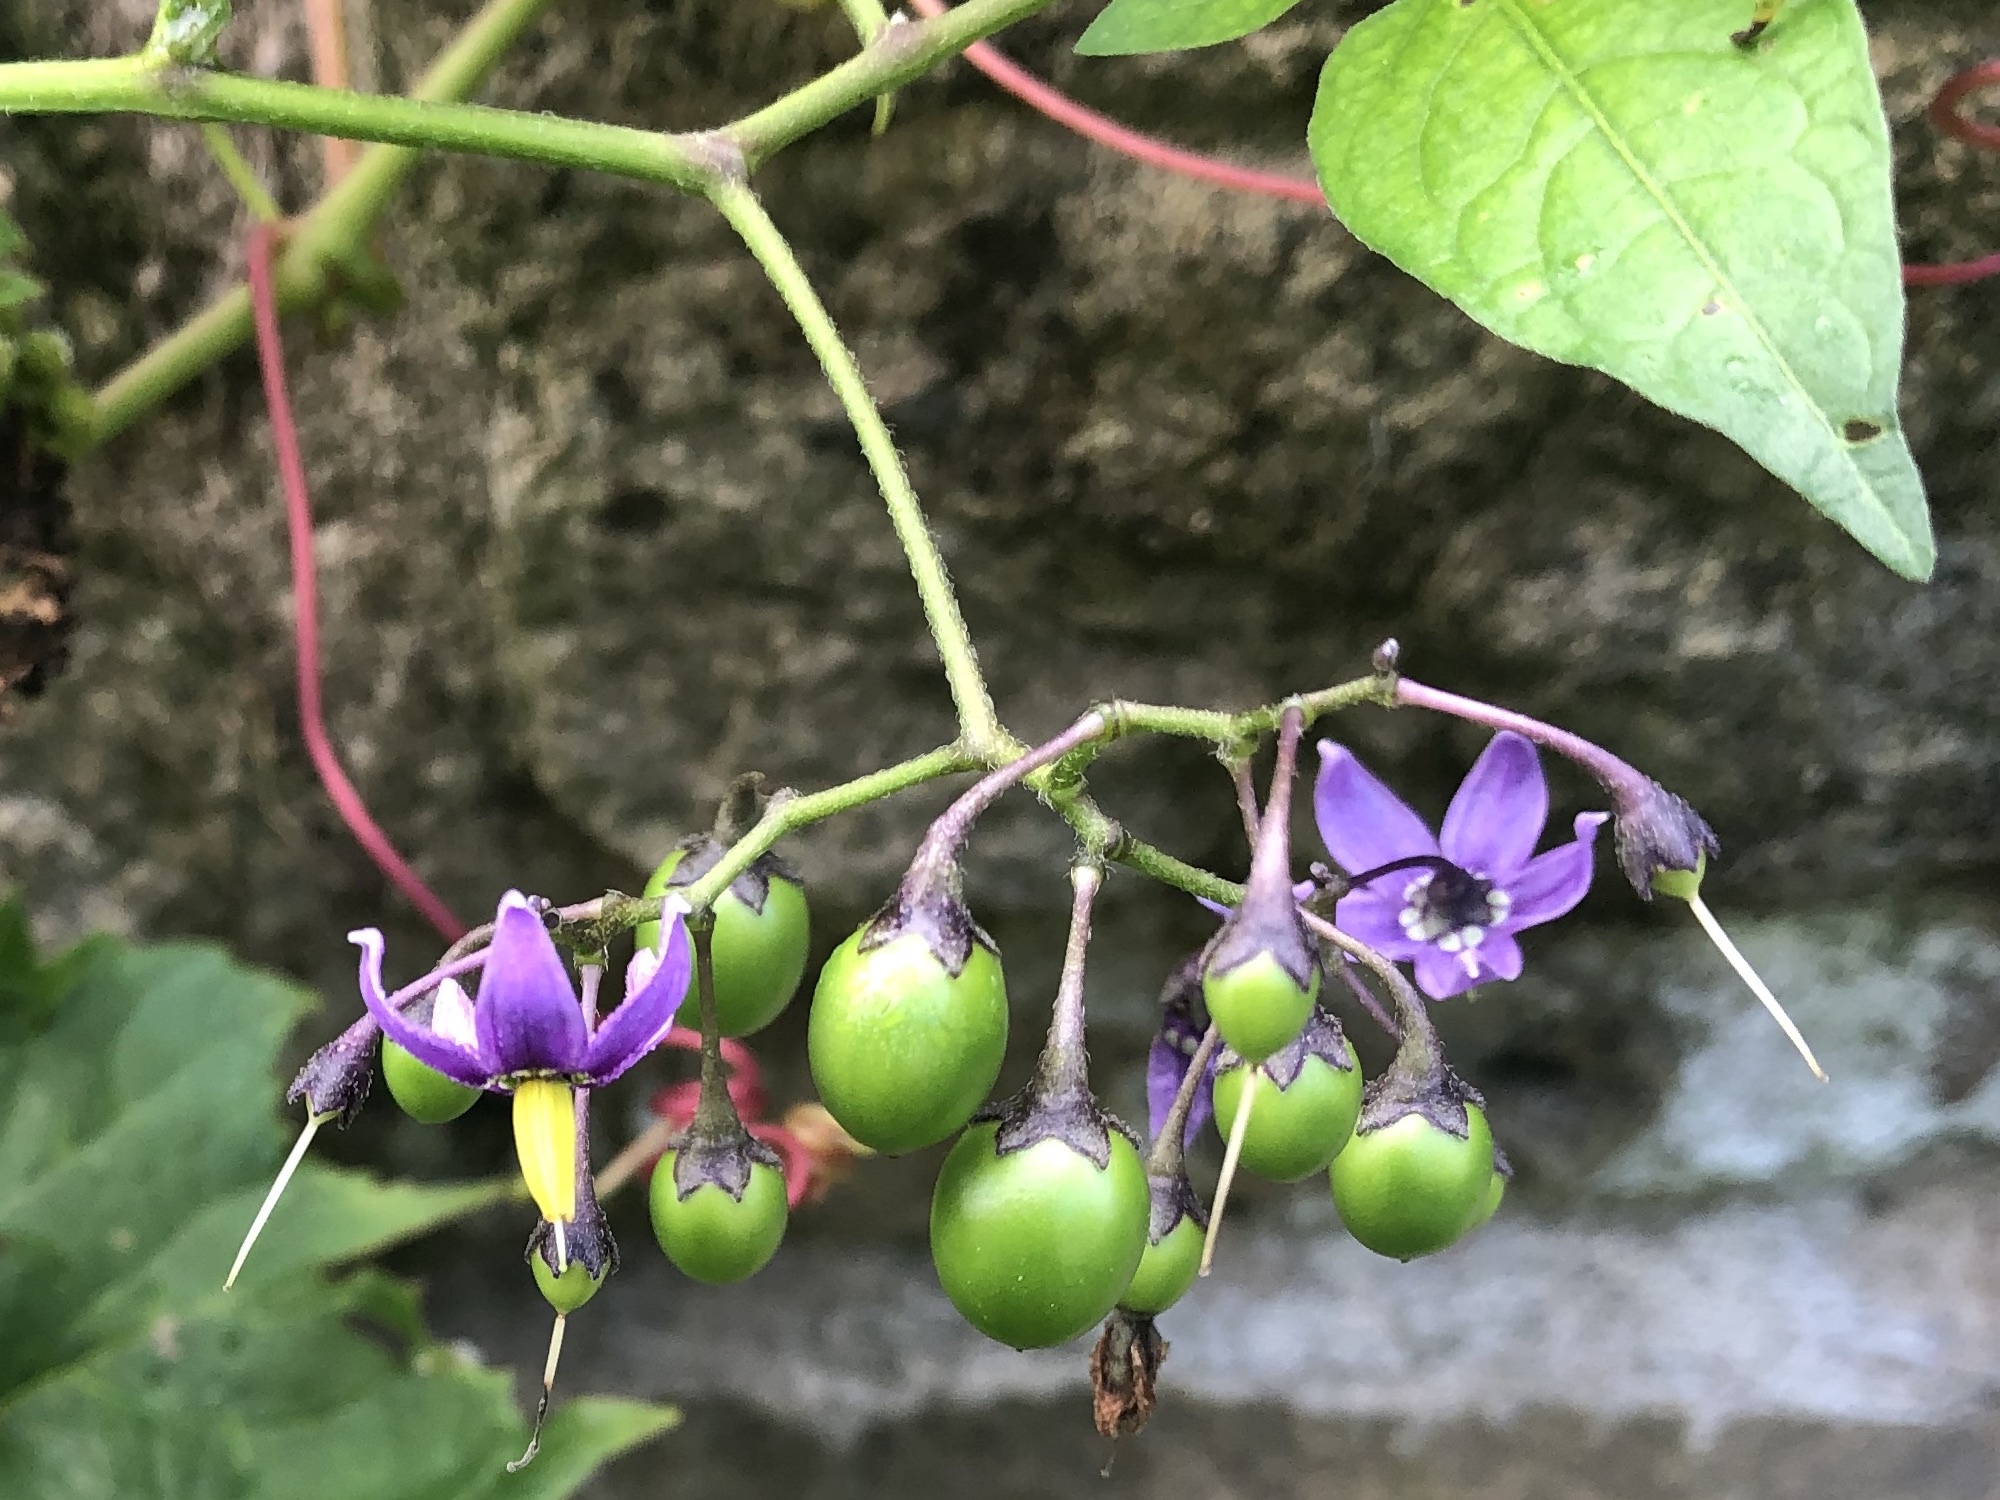 Bittersweet Nightshade berries forming on plantoverhanging CCC stone wall in Madison, Wisconsin on August 15, 2022.